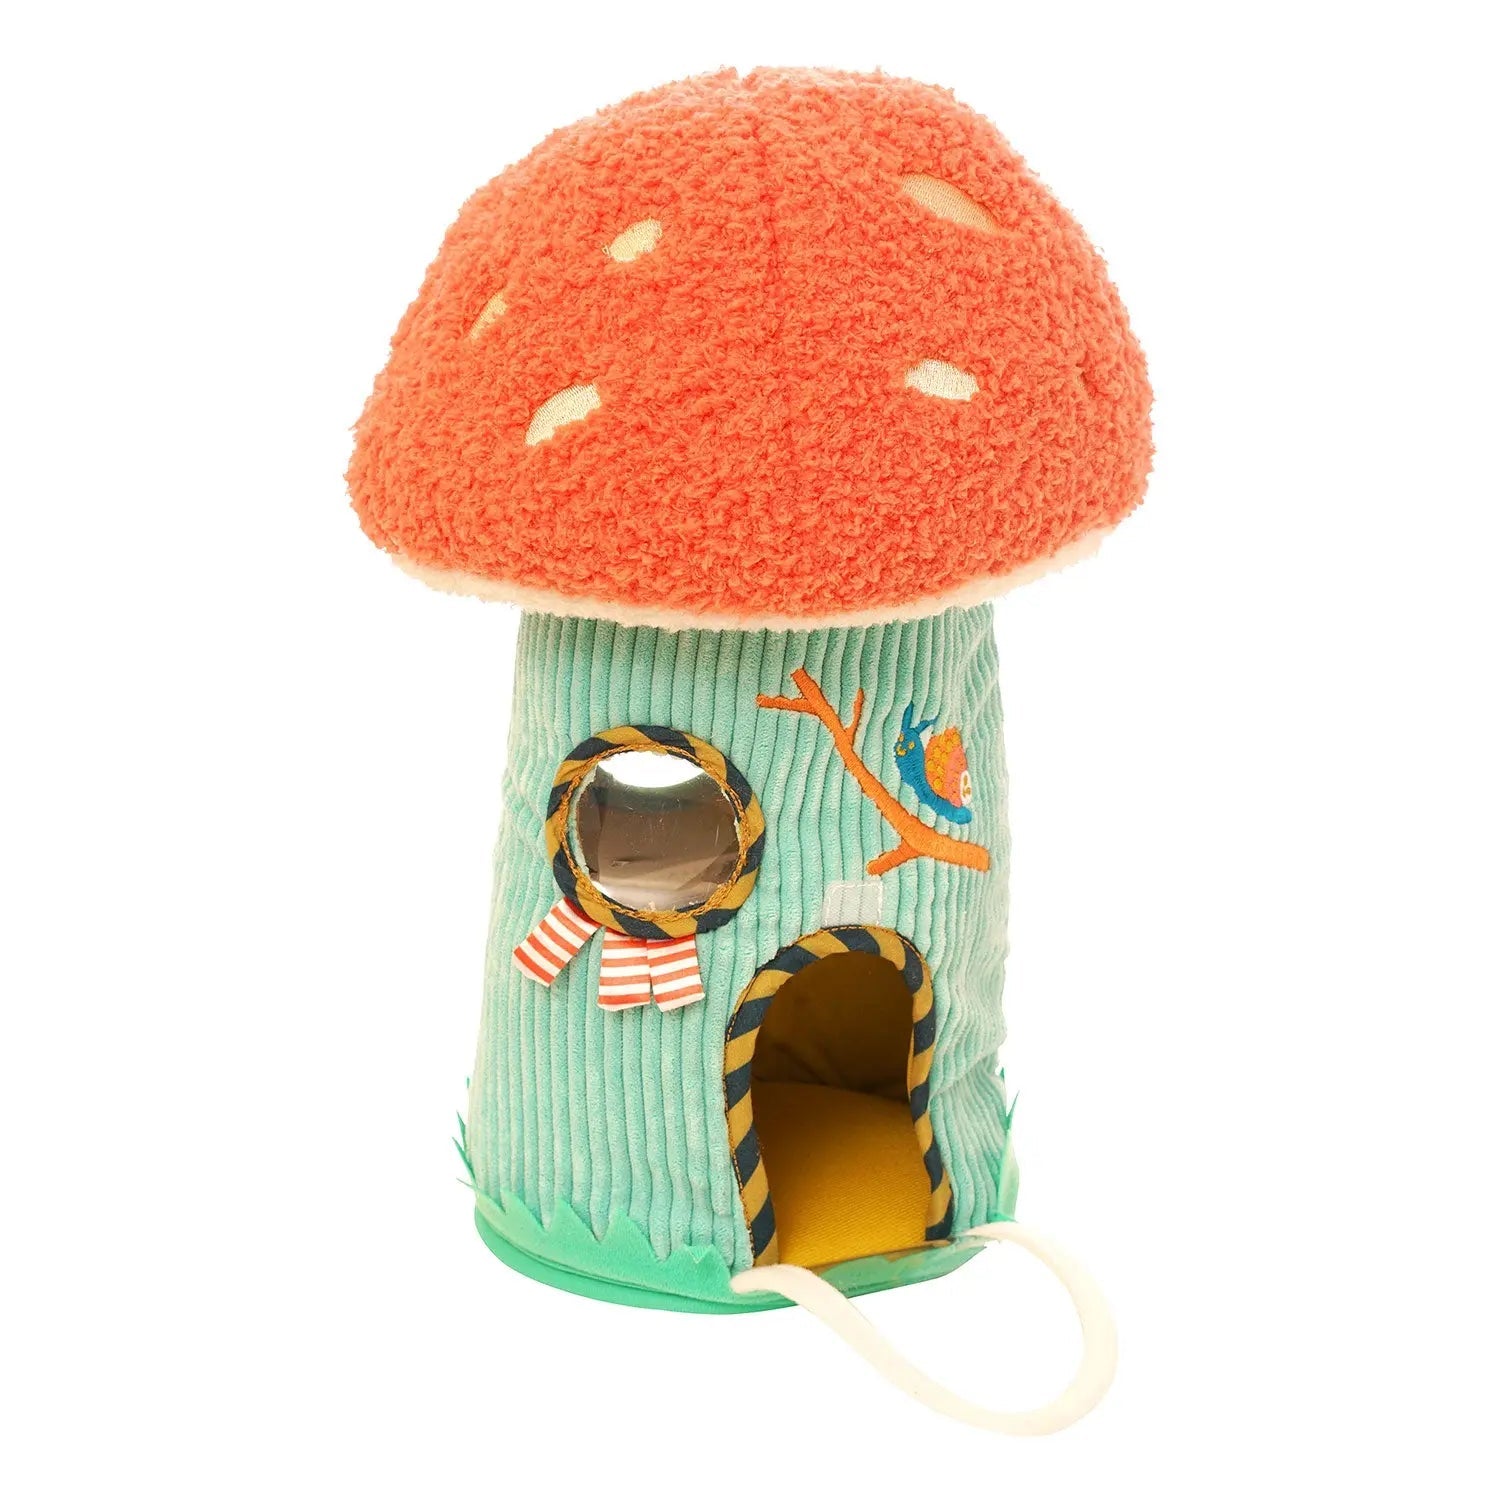 has adorable mushroom play tents for kids 